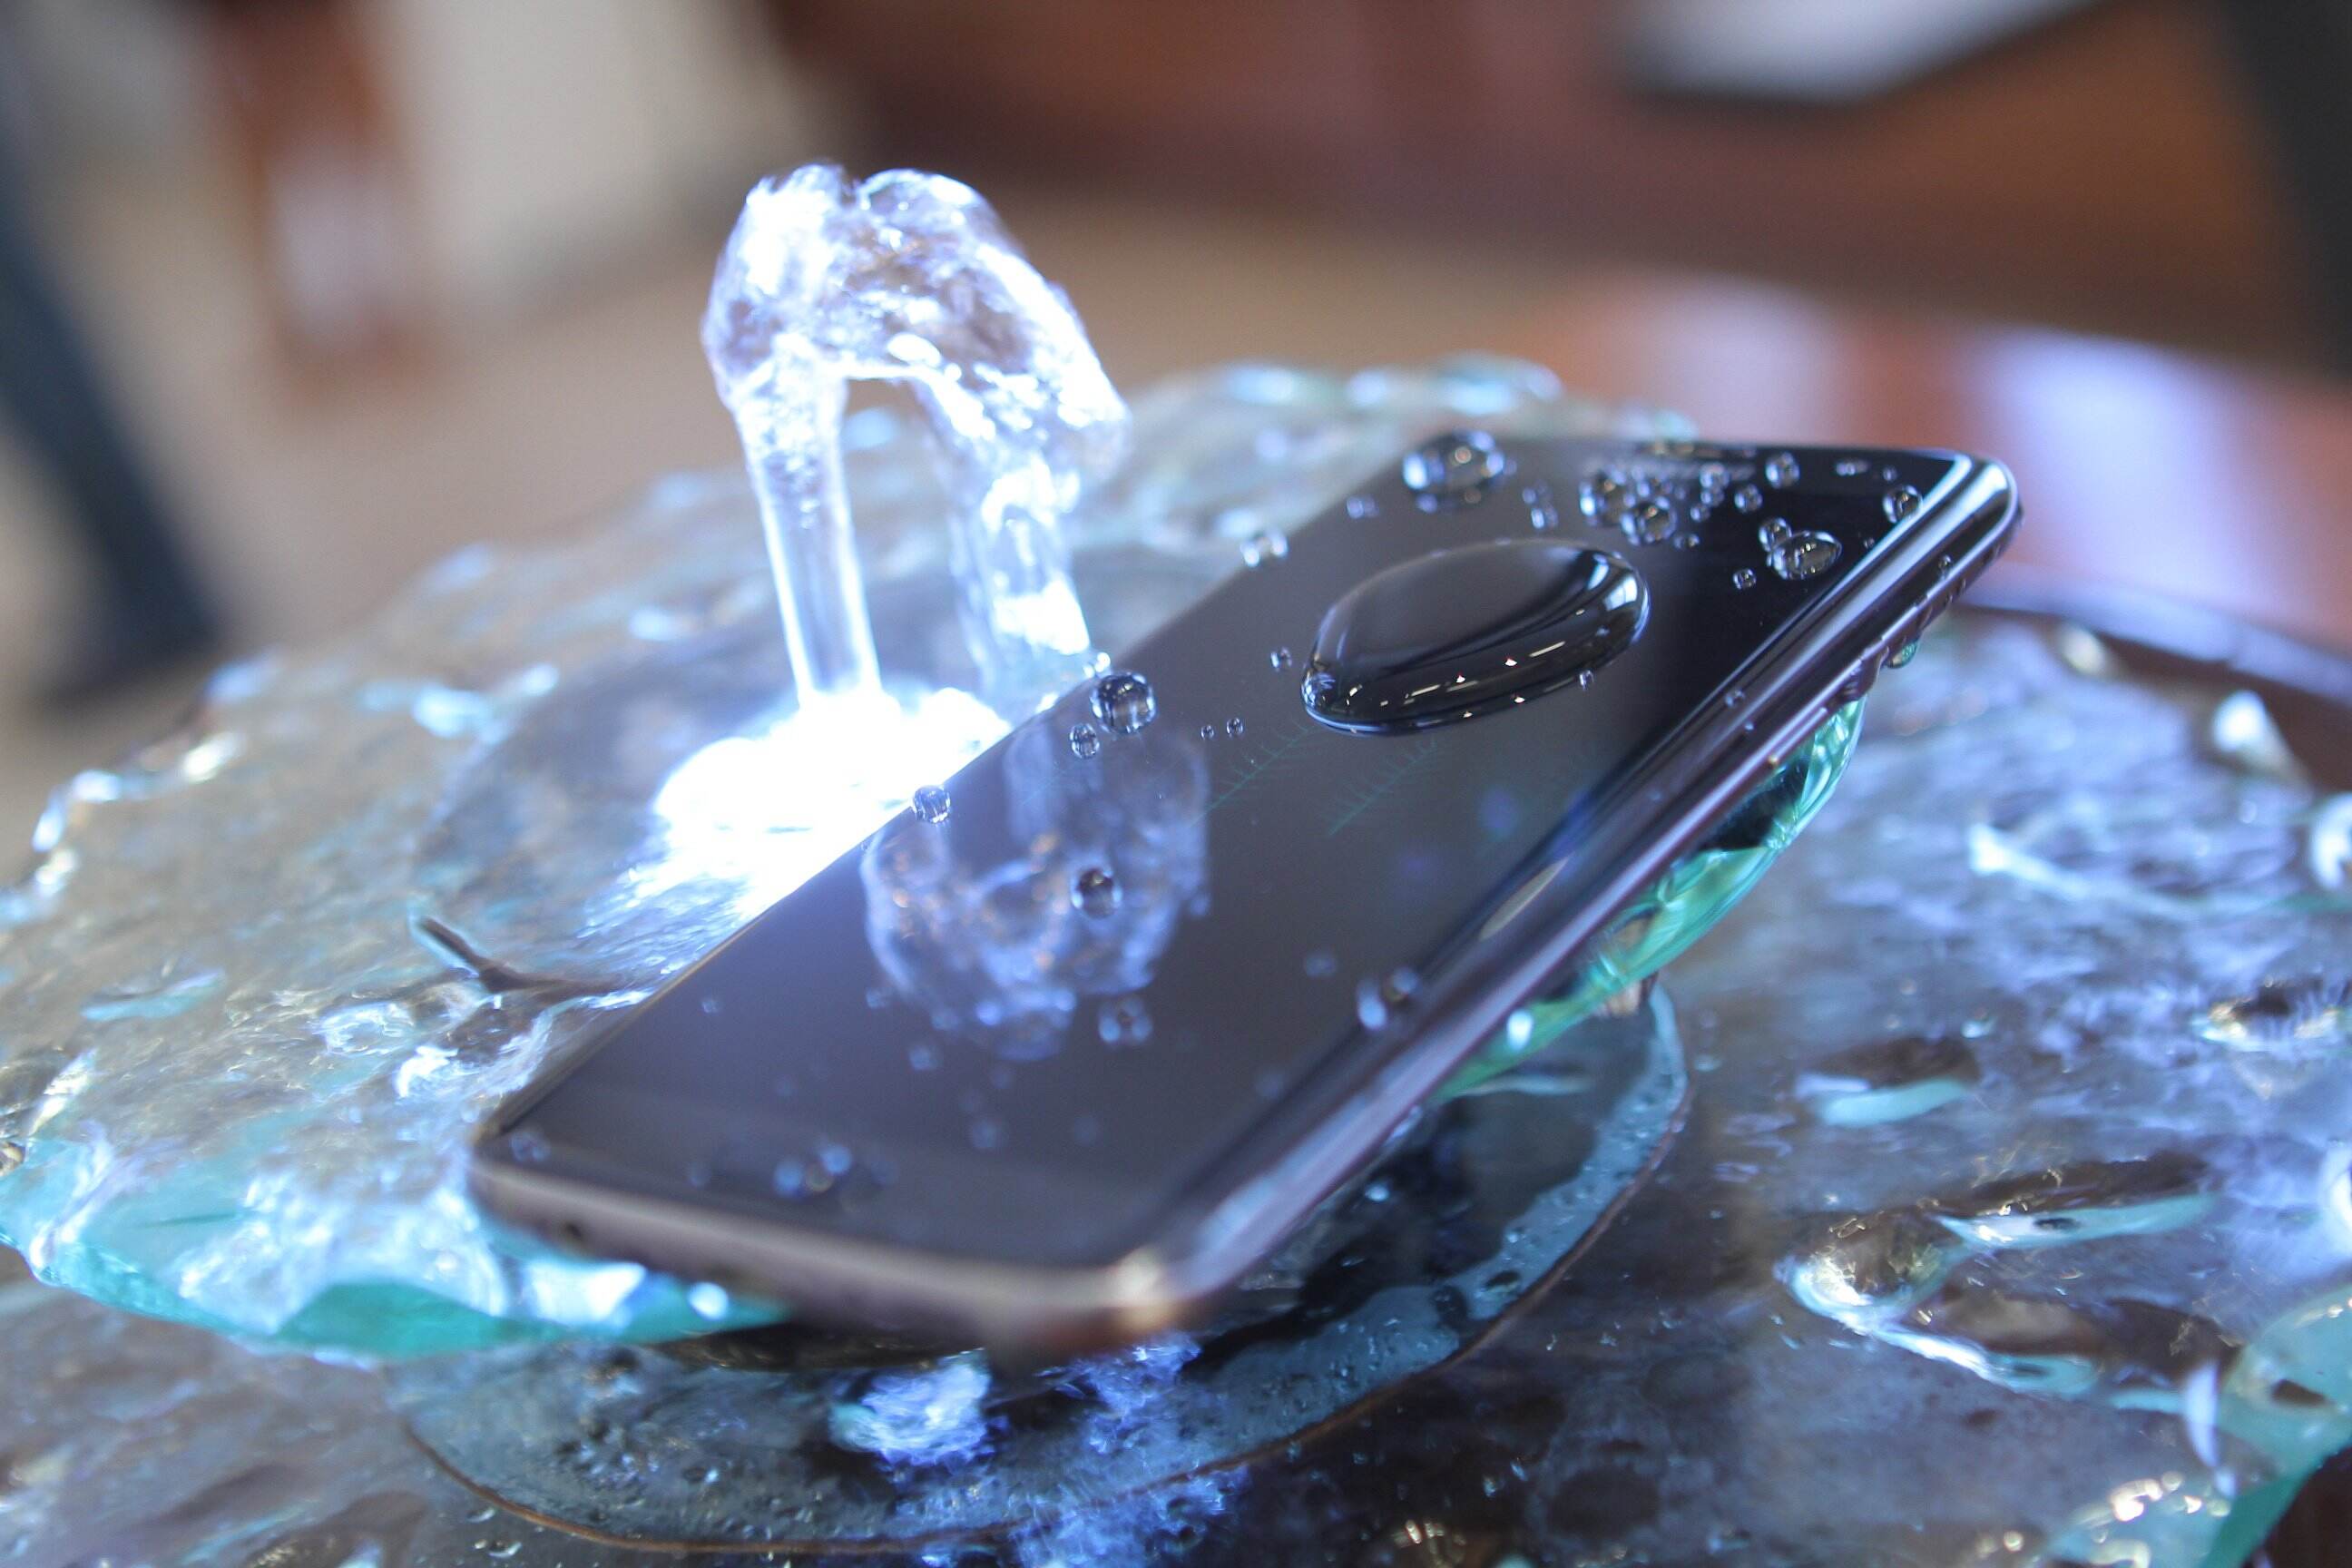 How To Save A Wet Smartphone